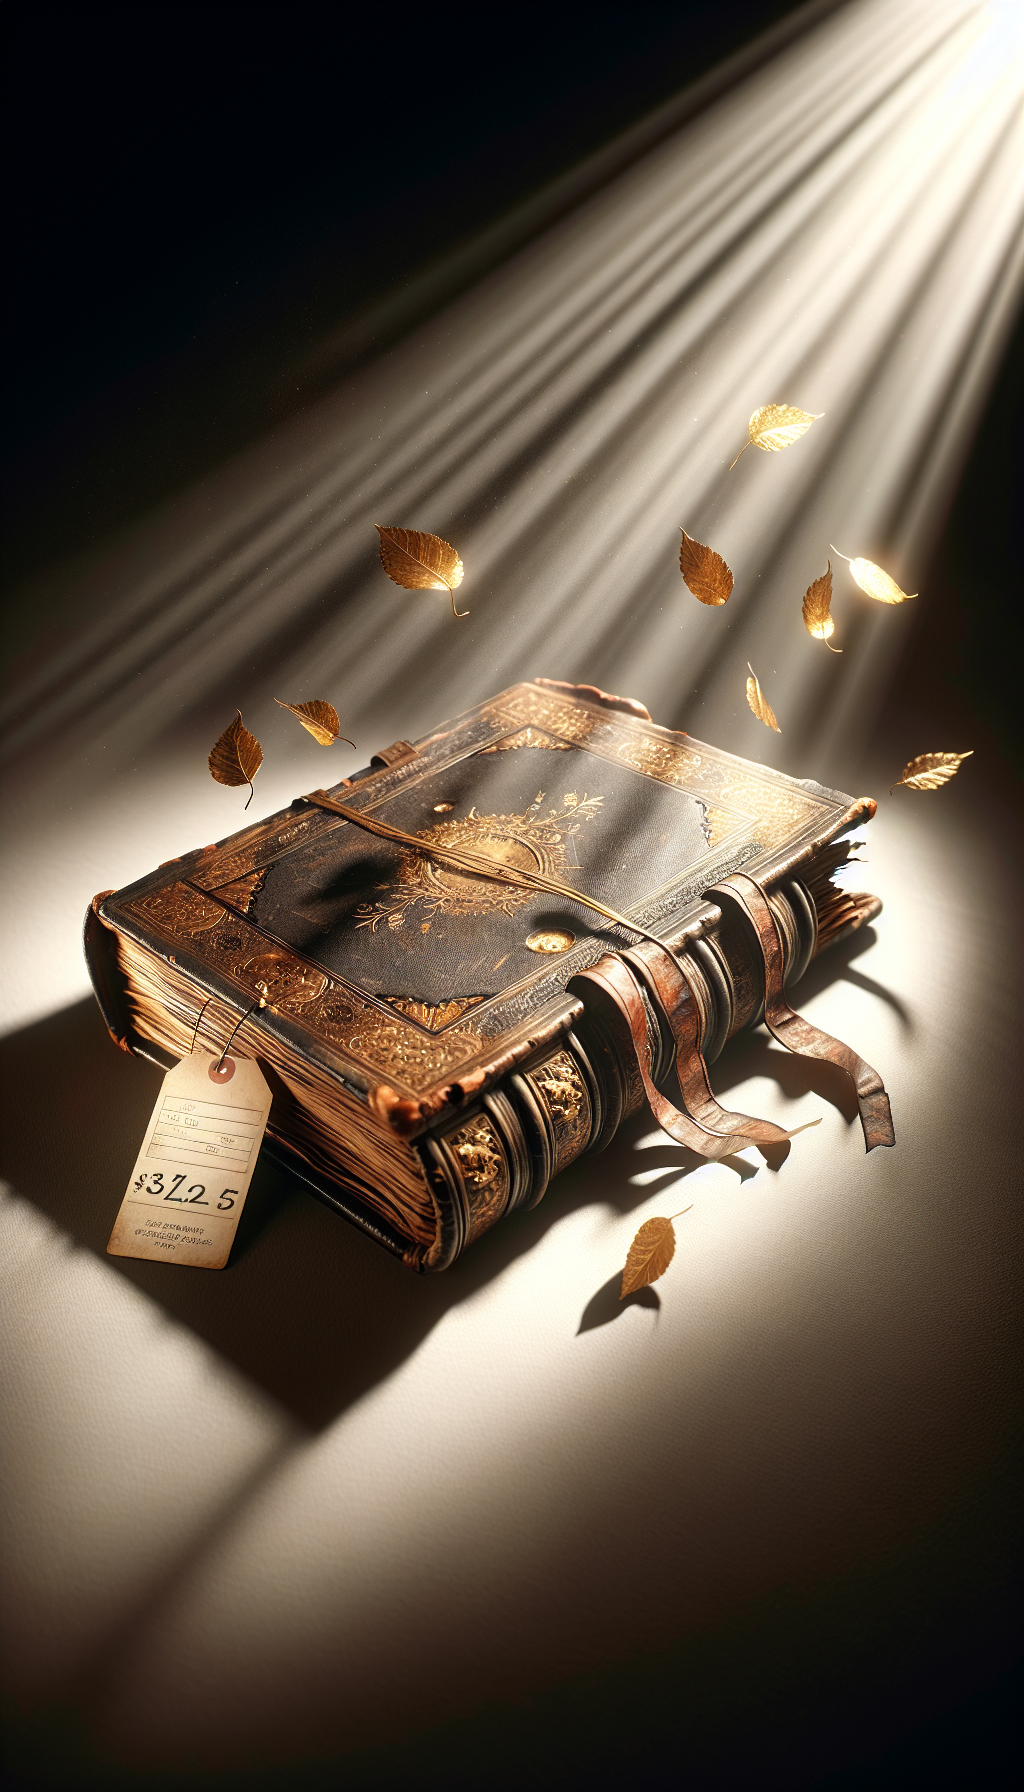 An antique, leather-bound book stands majestically on a pedestal with soft beams of light illuminating it from above, casting a faint shadow of iconic historical figures onto an open page, while delicate golden leaves—the embodiment of its worth—flutter down around it. A translucent price tag hangs off the bookmark, subtly displaying an exorbitant amount in an elegant, vintage script.